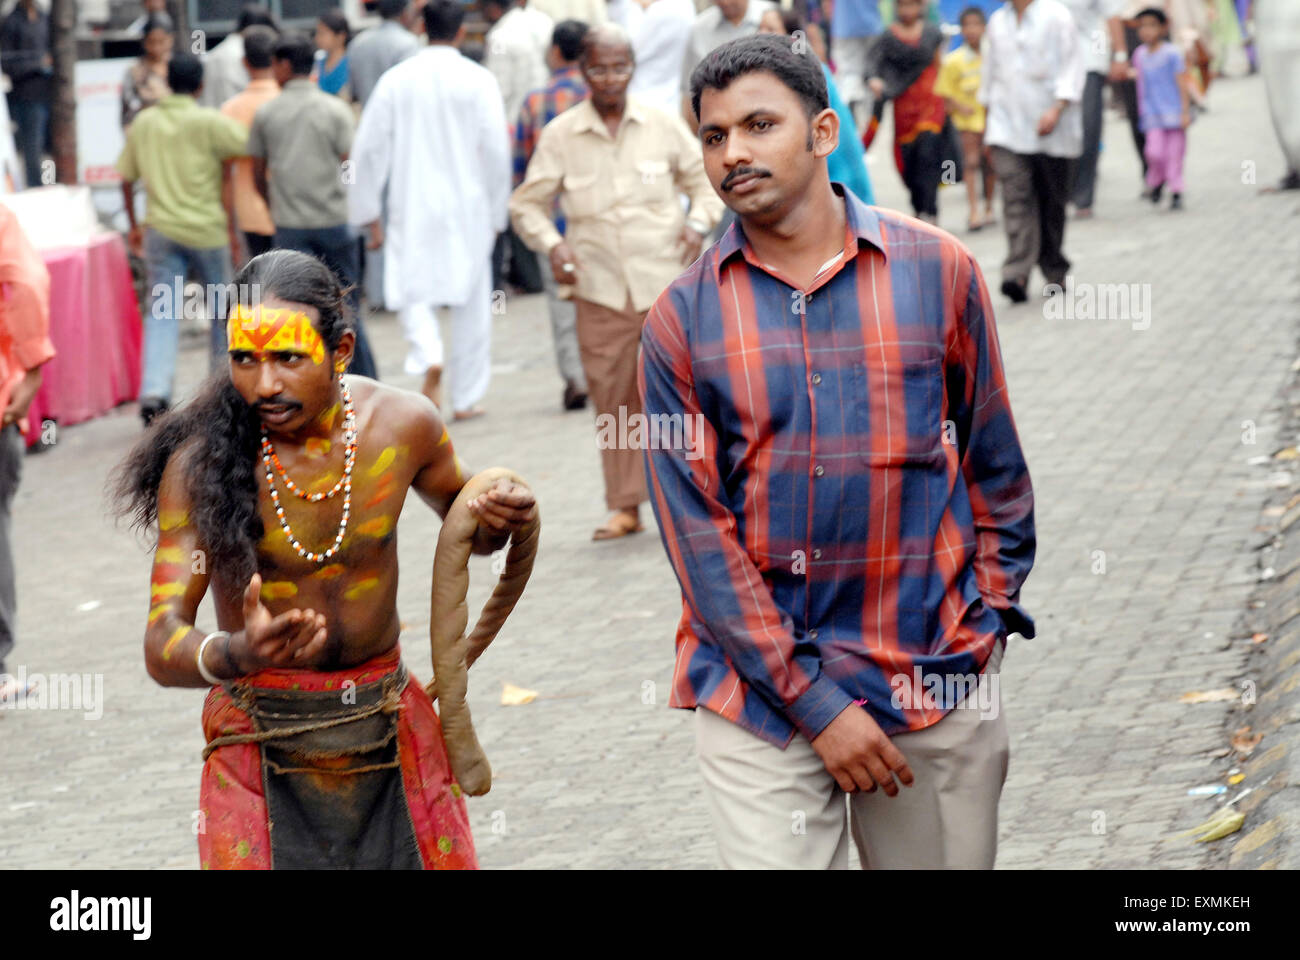 A beggar seek alms by whipping himself with a rope in Bombay now Mumbai ; Maharashtra ; India Stock Photo